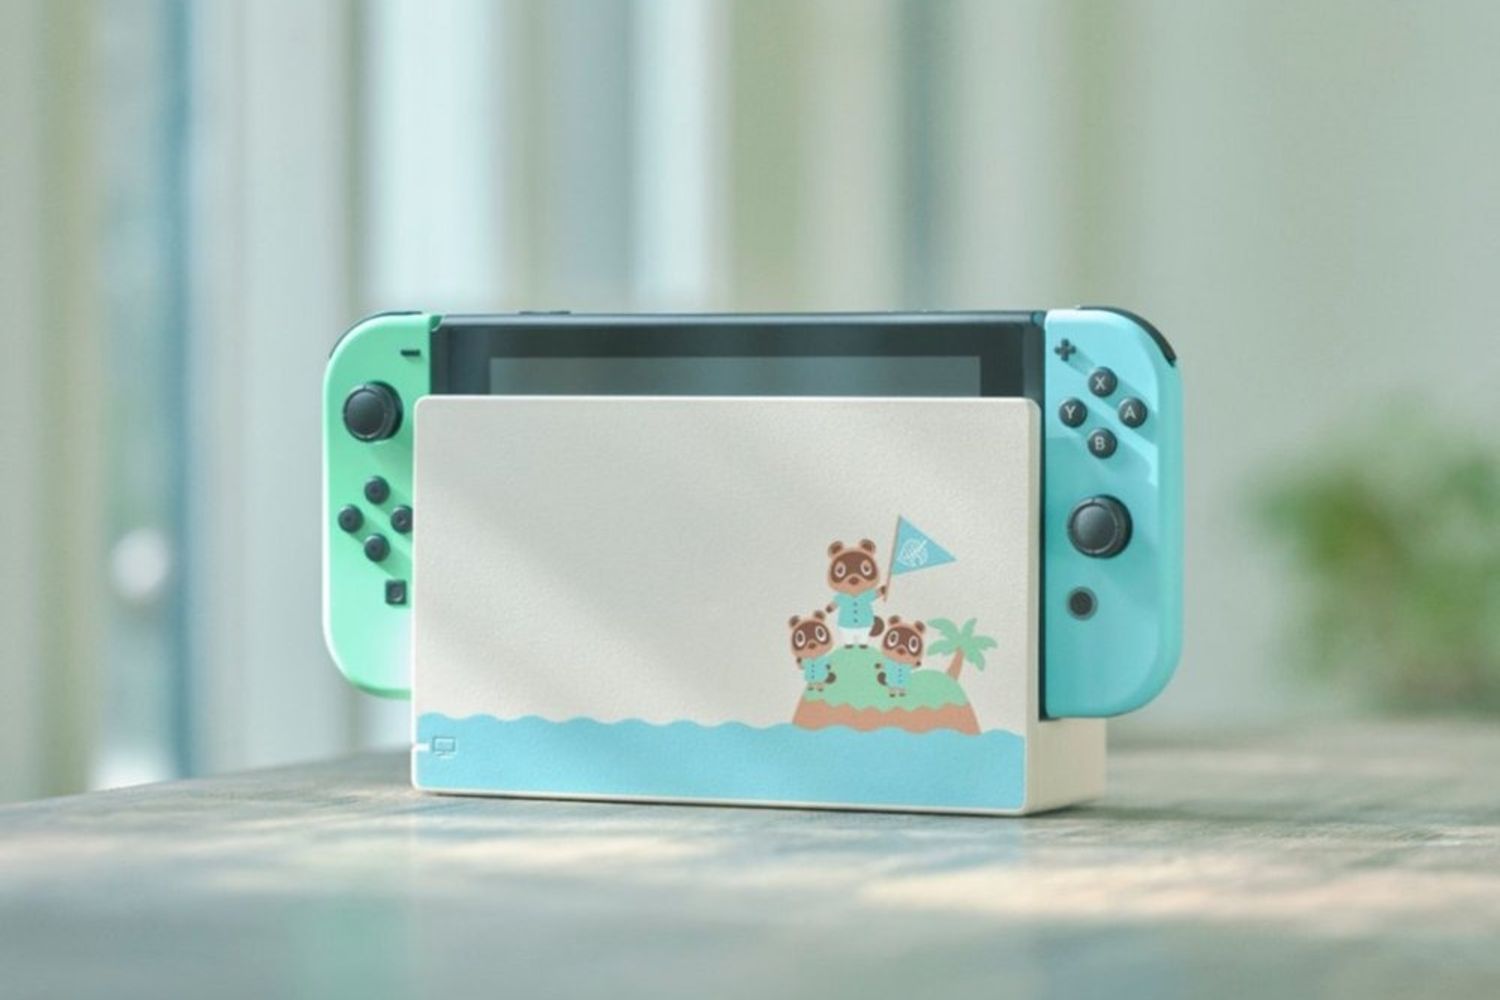 10 Best Games On The Nintendo Switch For Dog Lovers